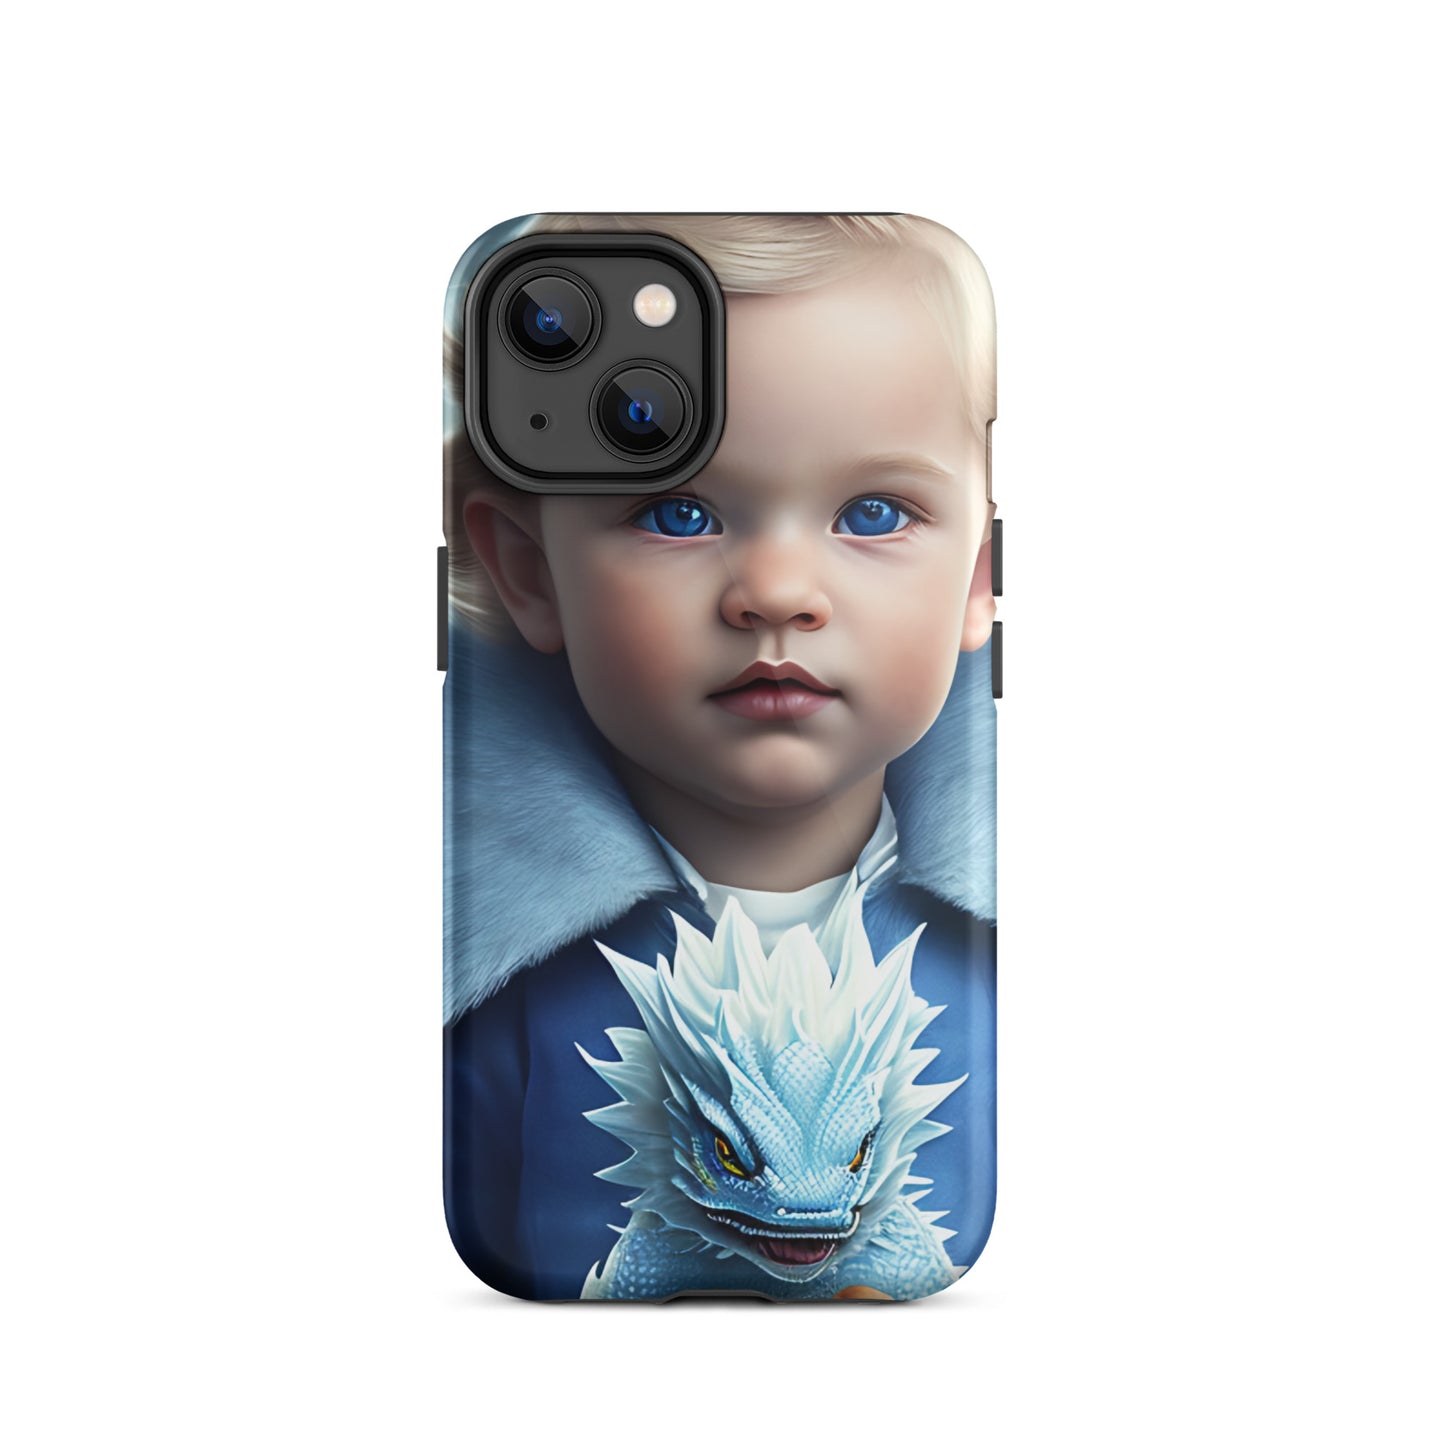 A picture of a an iphone case with a blond haired blue eyed boy, blue top holding a baby ice dragon in front - Dragon Prince #2 tough iphone case - glossy-iphone-14-front